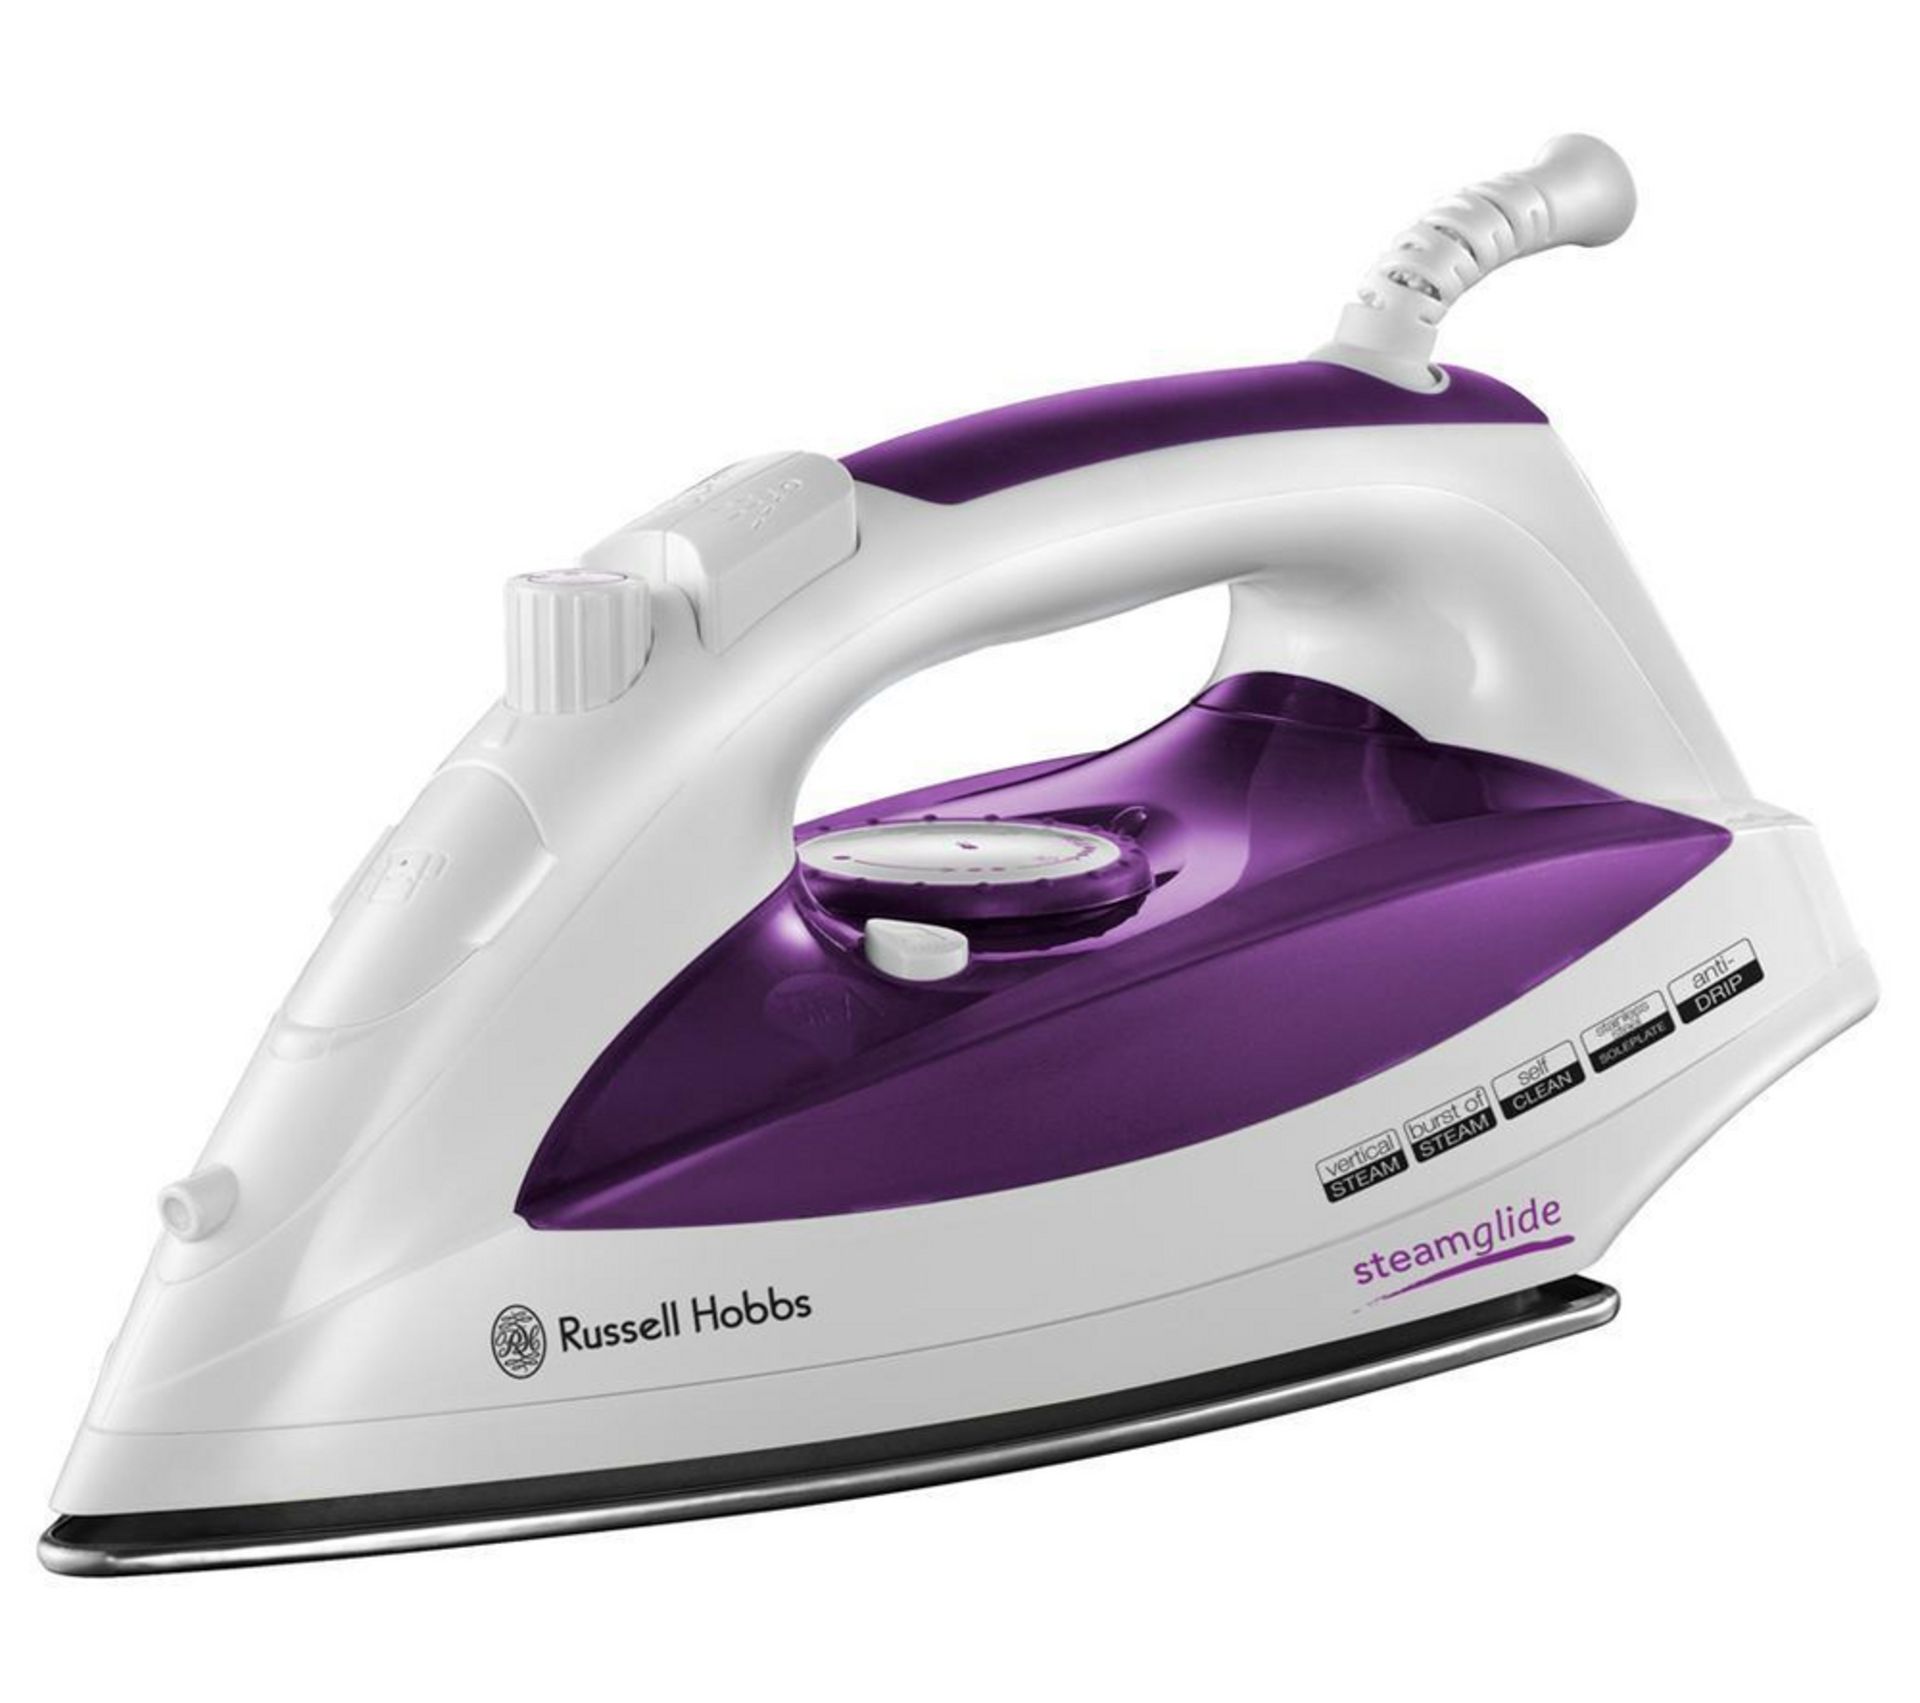 Brand New Russell Hobbs Steamglide Iron 2400W - Stainless Steel Plate - Self Clean- Anti Drip - ISP - Image 2 of 4